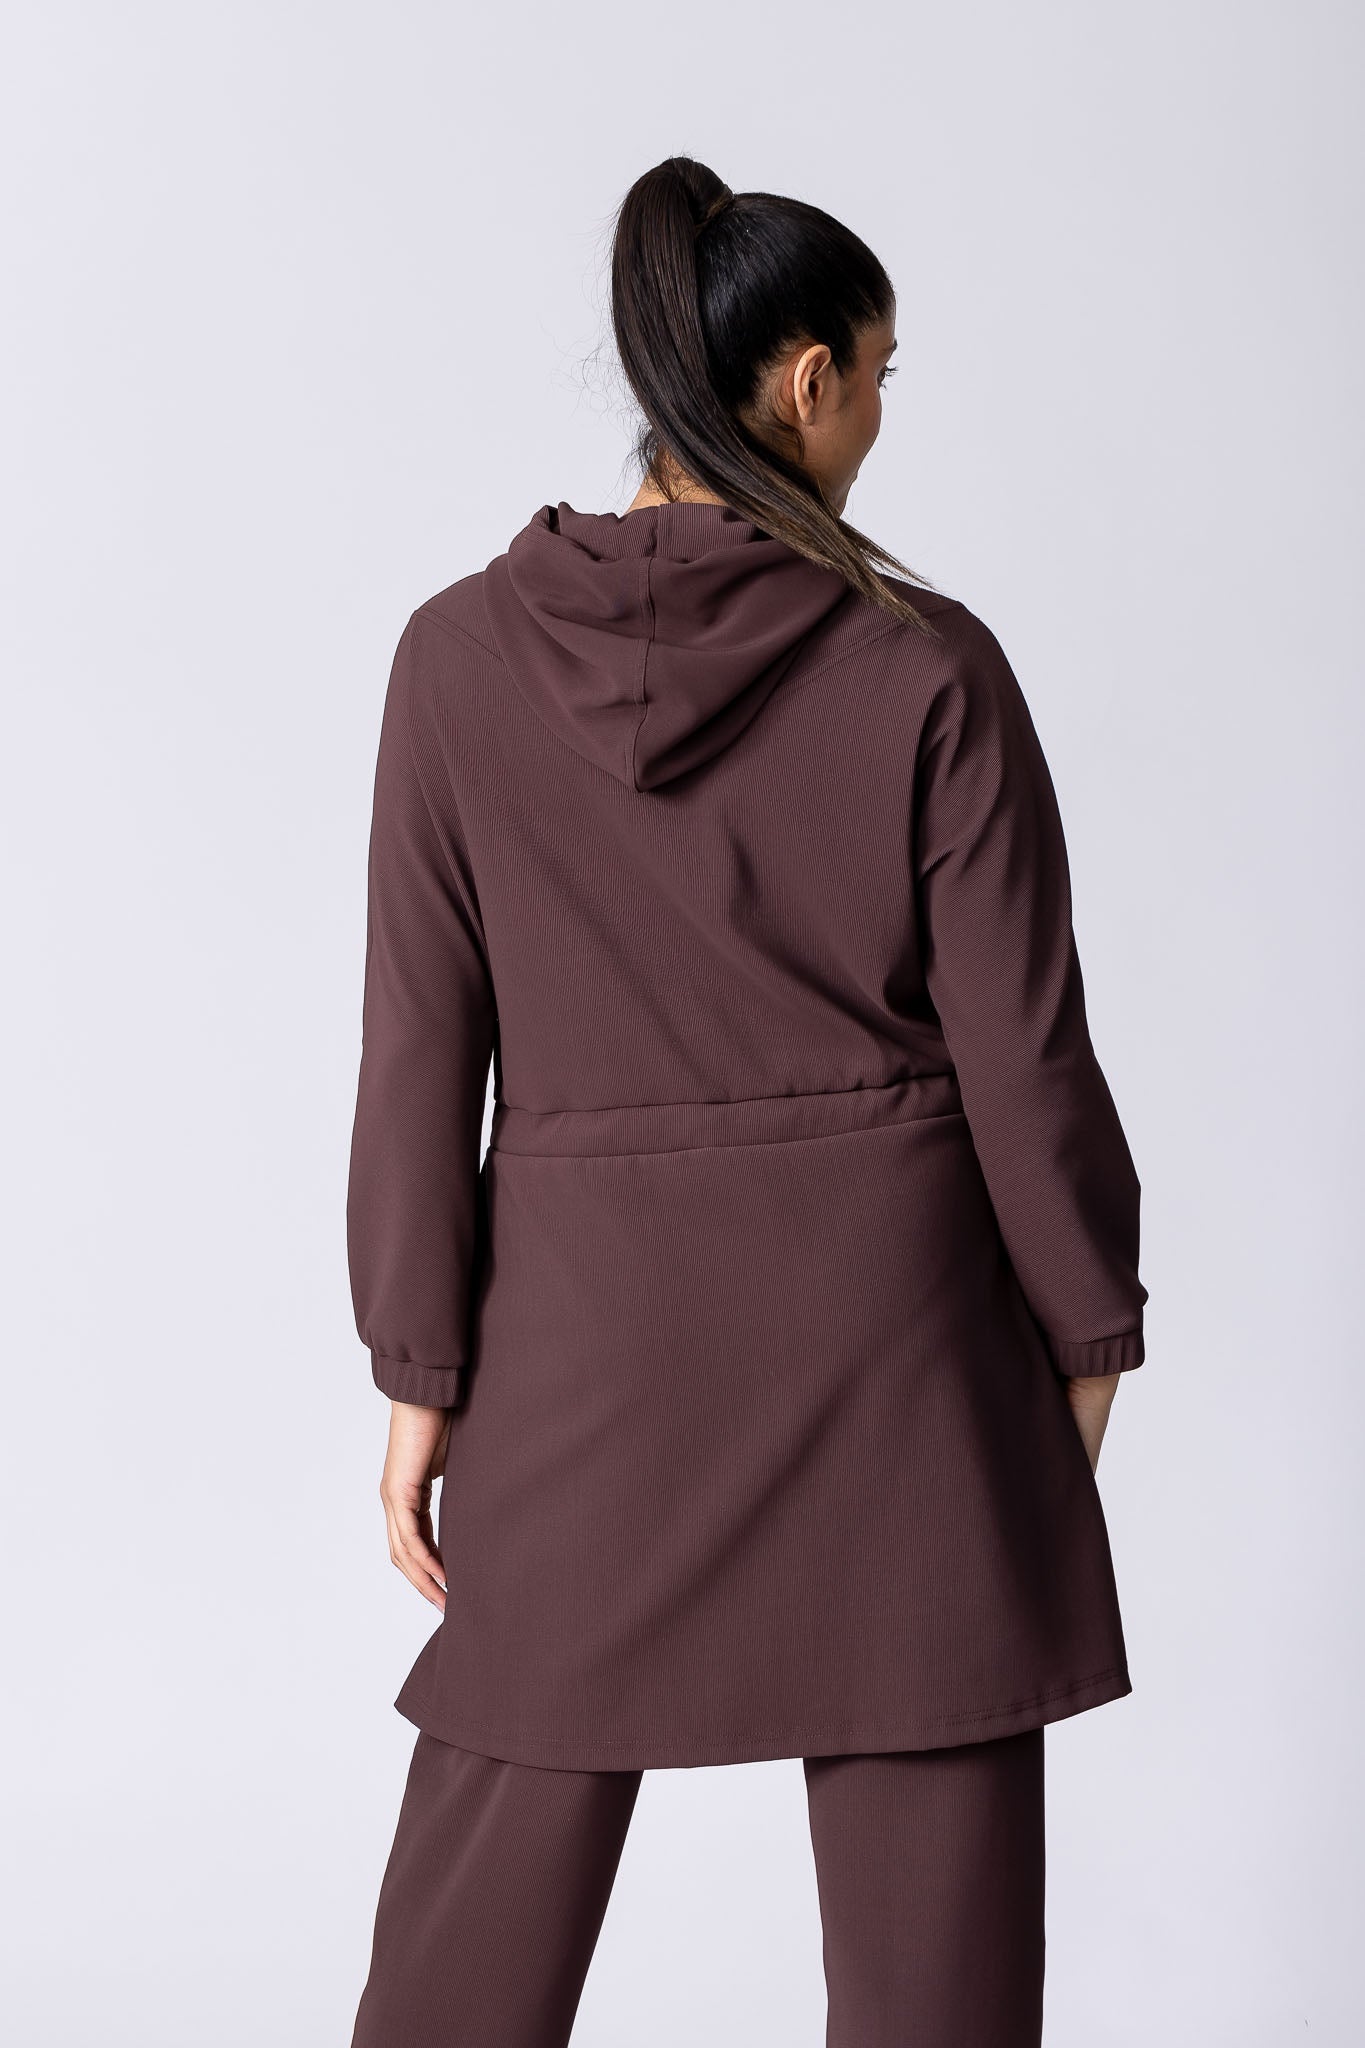 Coffee or brown colour longline hoodie with waist adjustability and draw string.